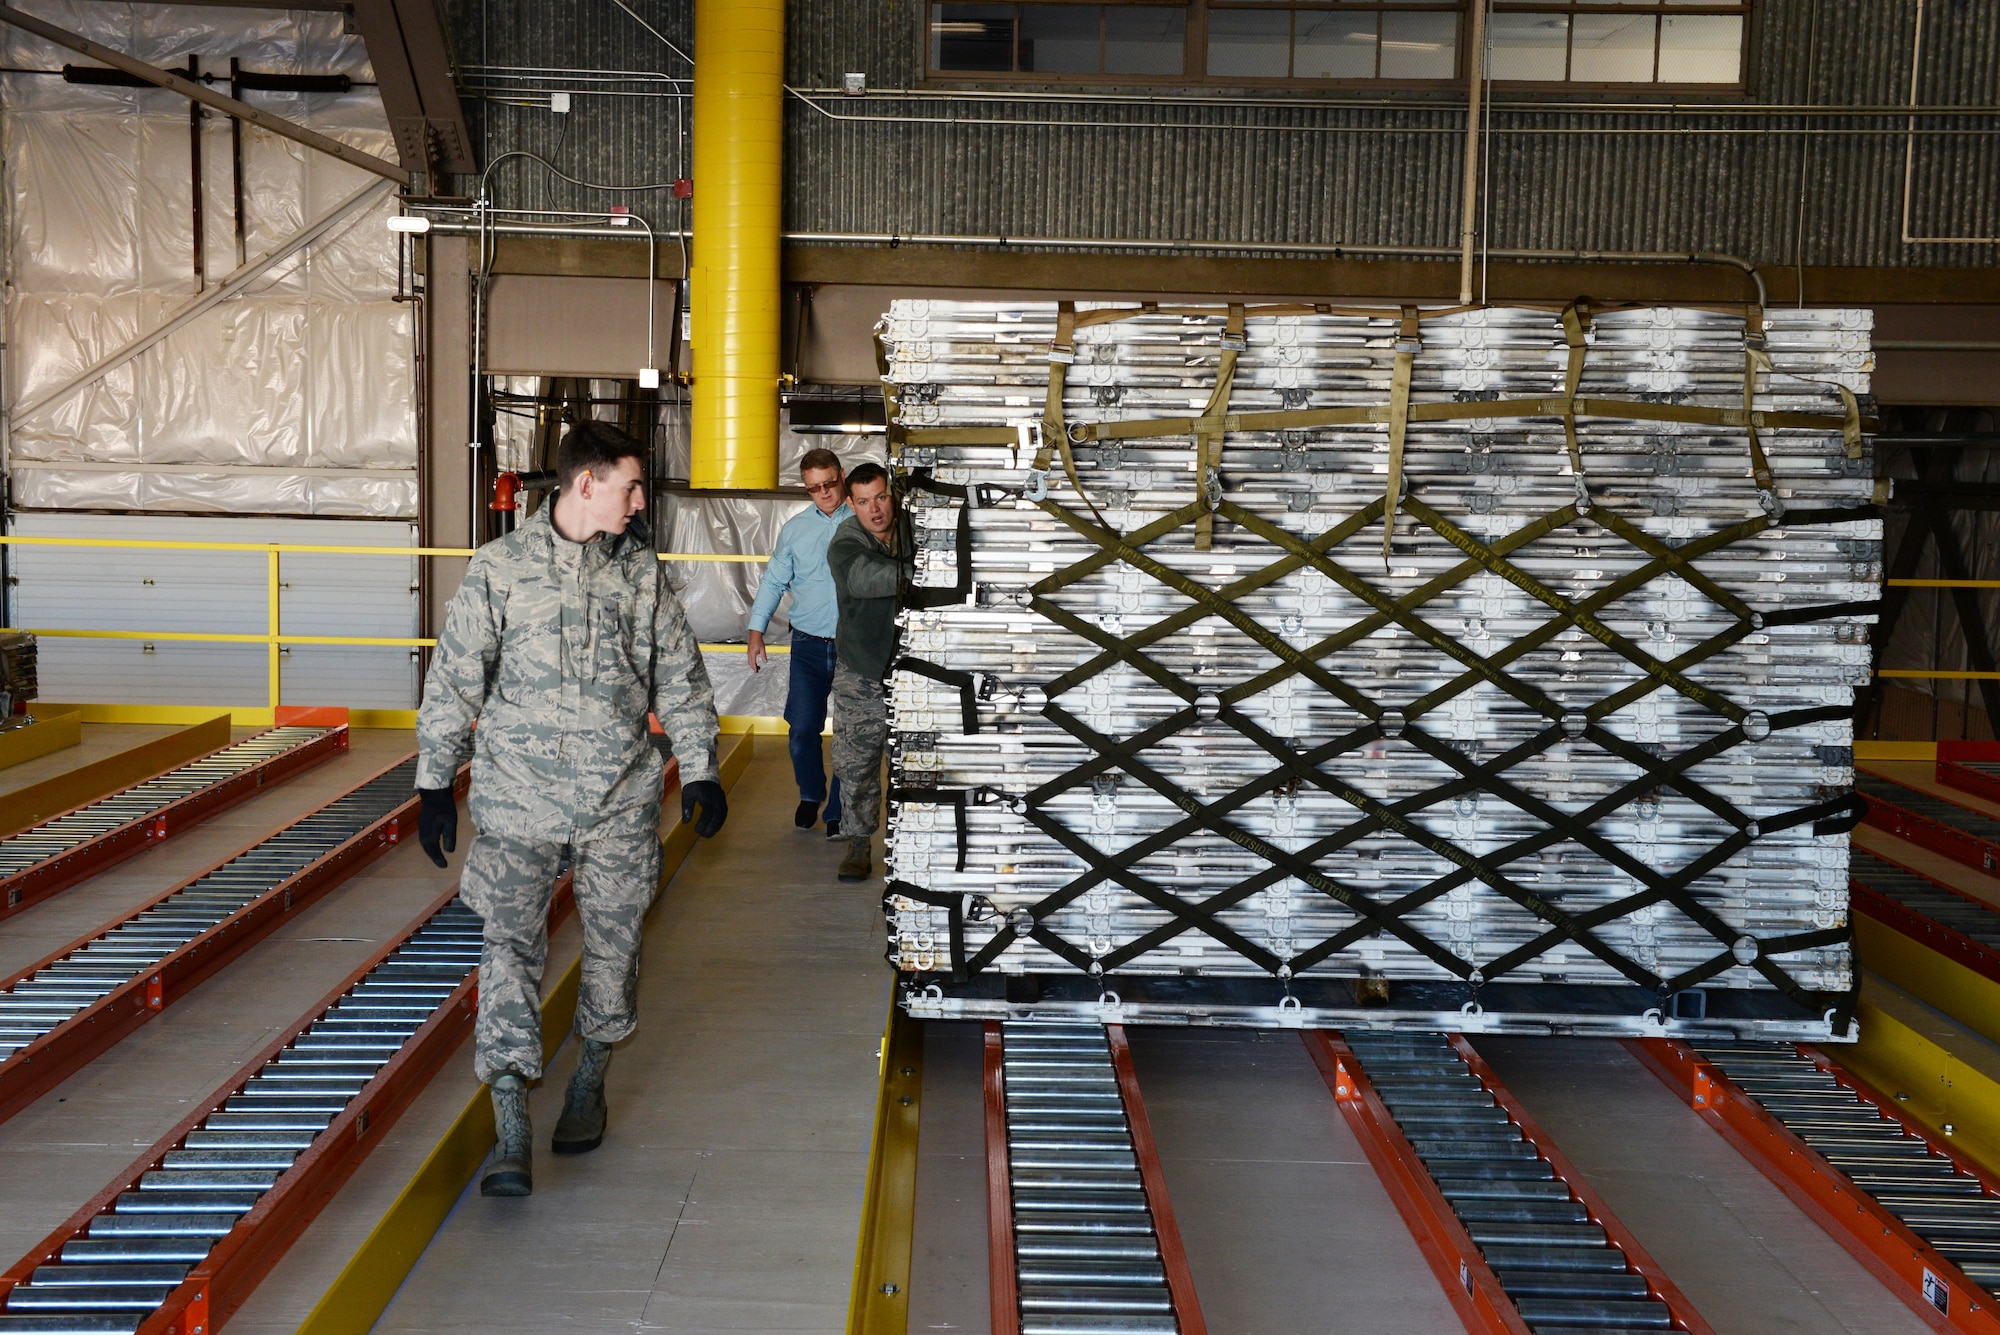 Airman 1st Class Hugh McMackin and Staff Sgt. Ryan Olszewski guide a pallet on the new pallet racking system, Nov. 7, 2018, at Pease Air National Guard Base, N.H. (Photo by Master Sgt. Thomas Johnson, 157th ARW Public Affairs)